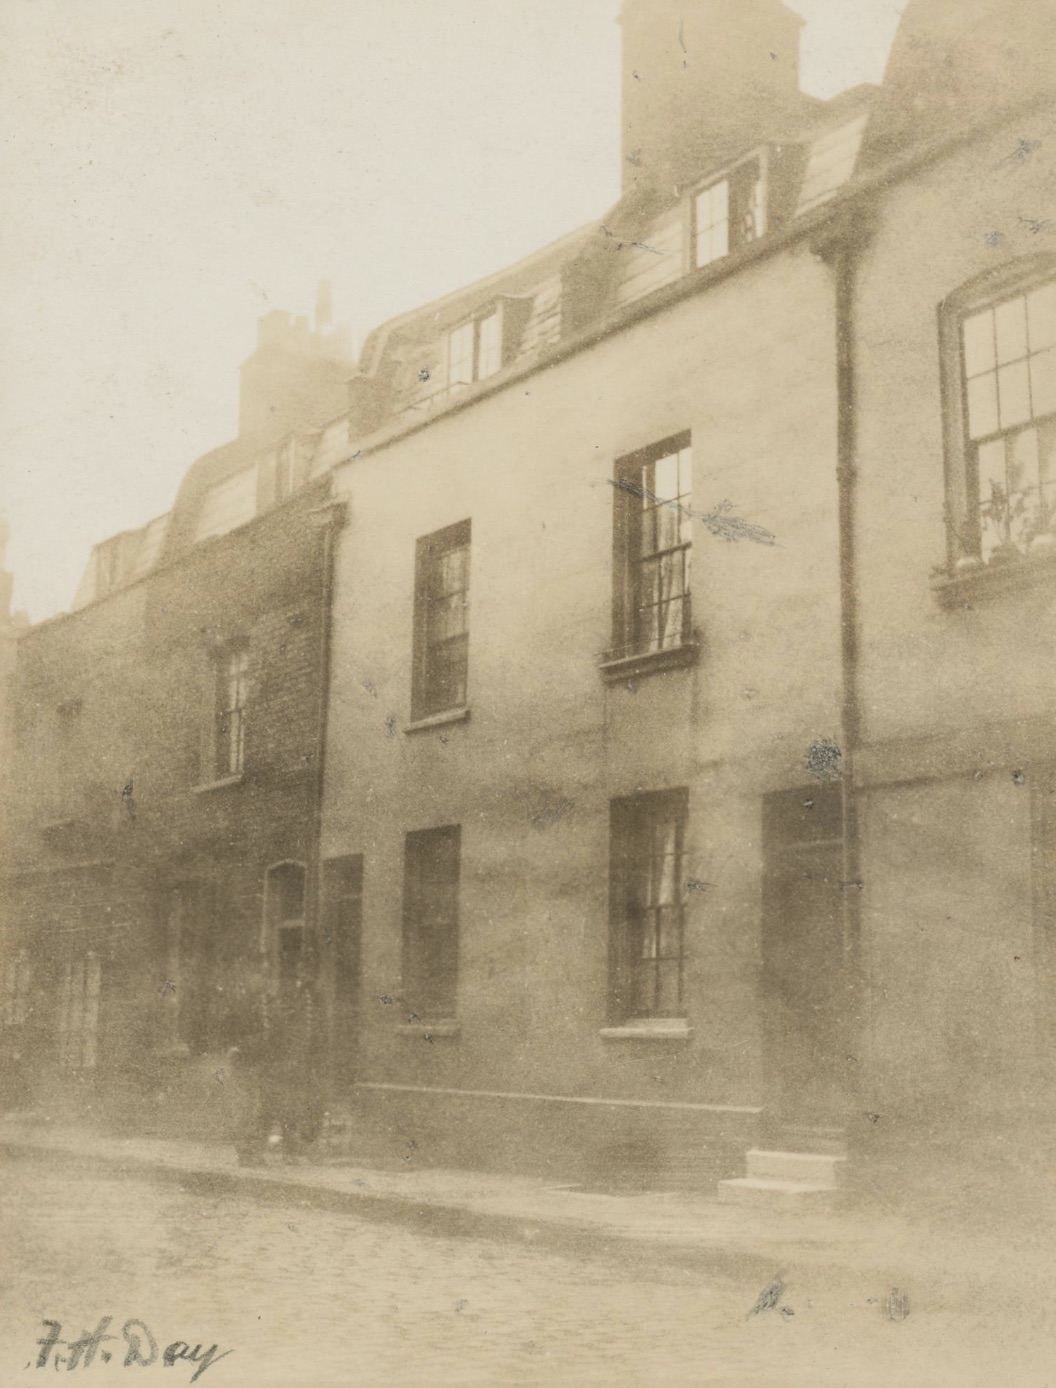 No. 8 Dean Street in 1889, photo by Fred Holland Day